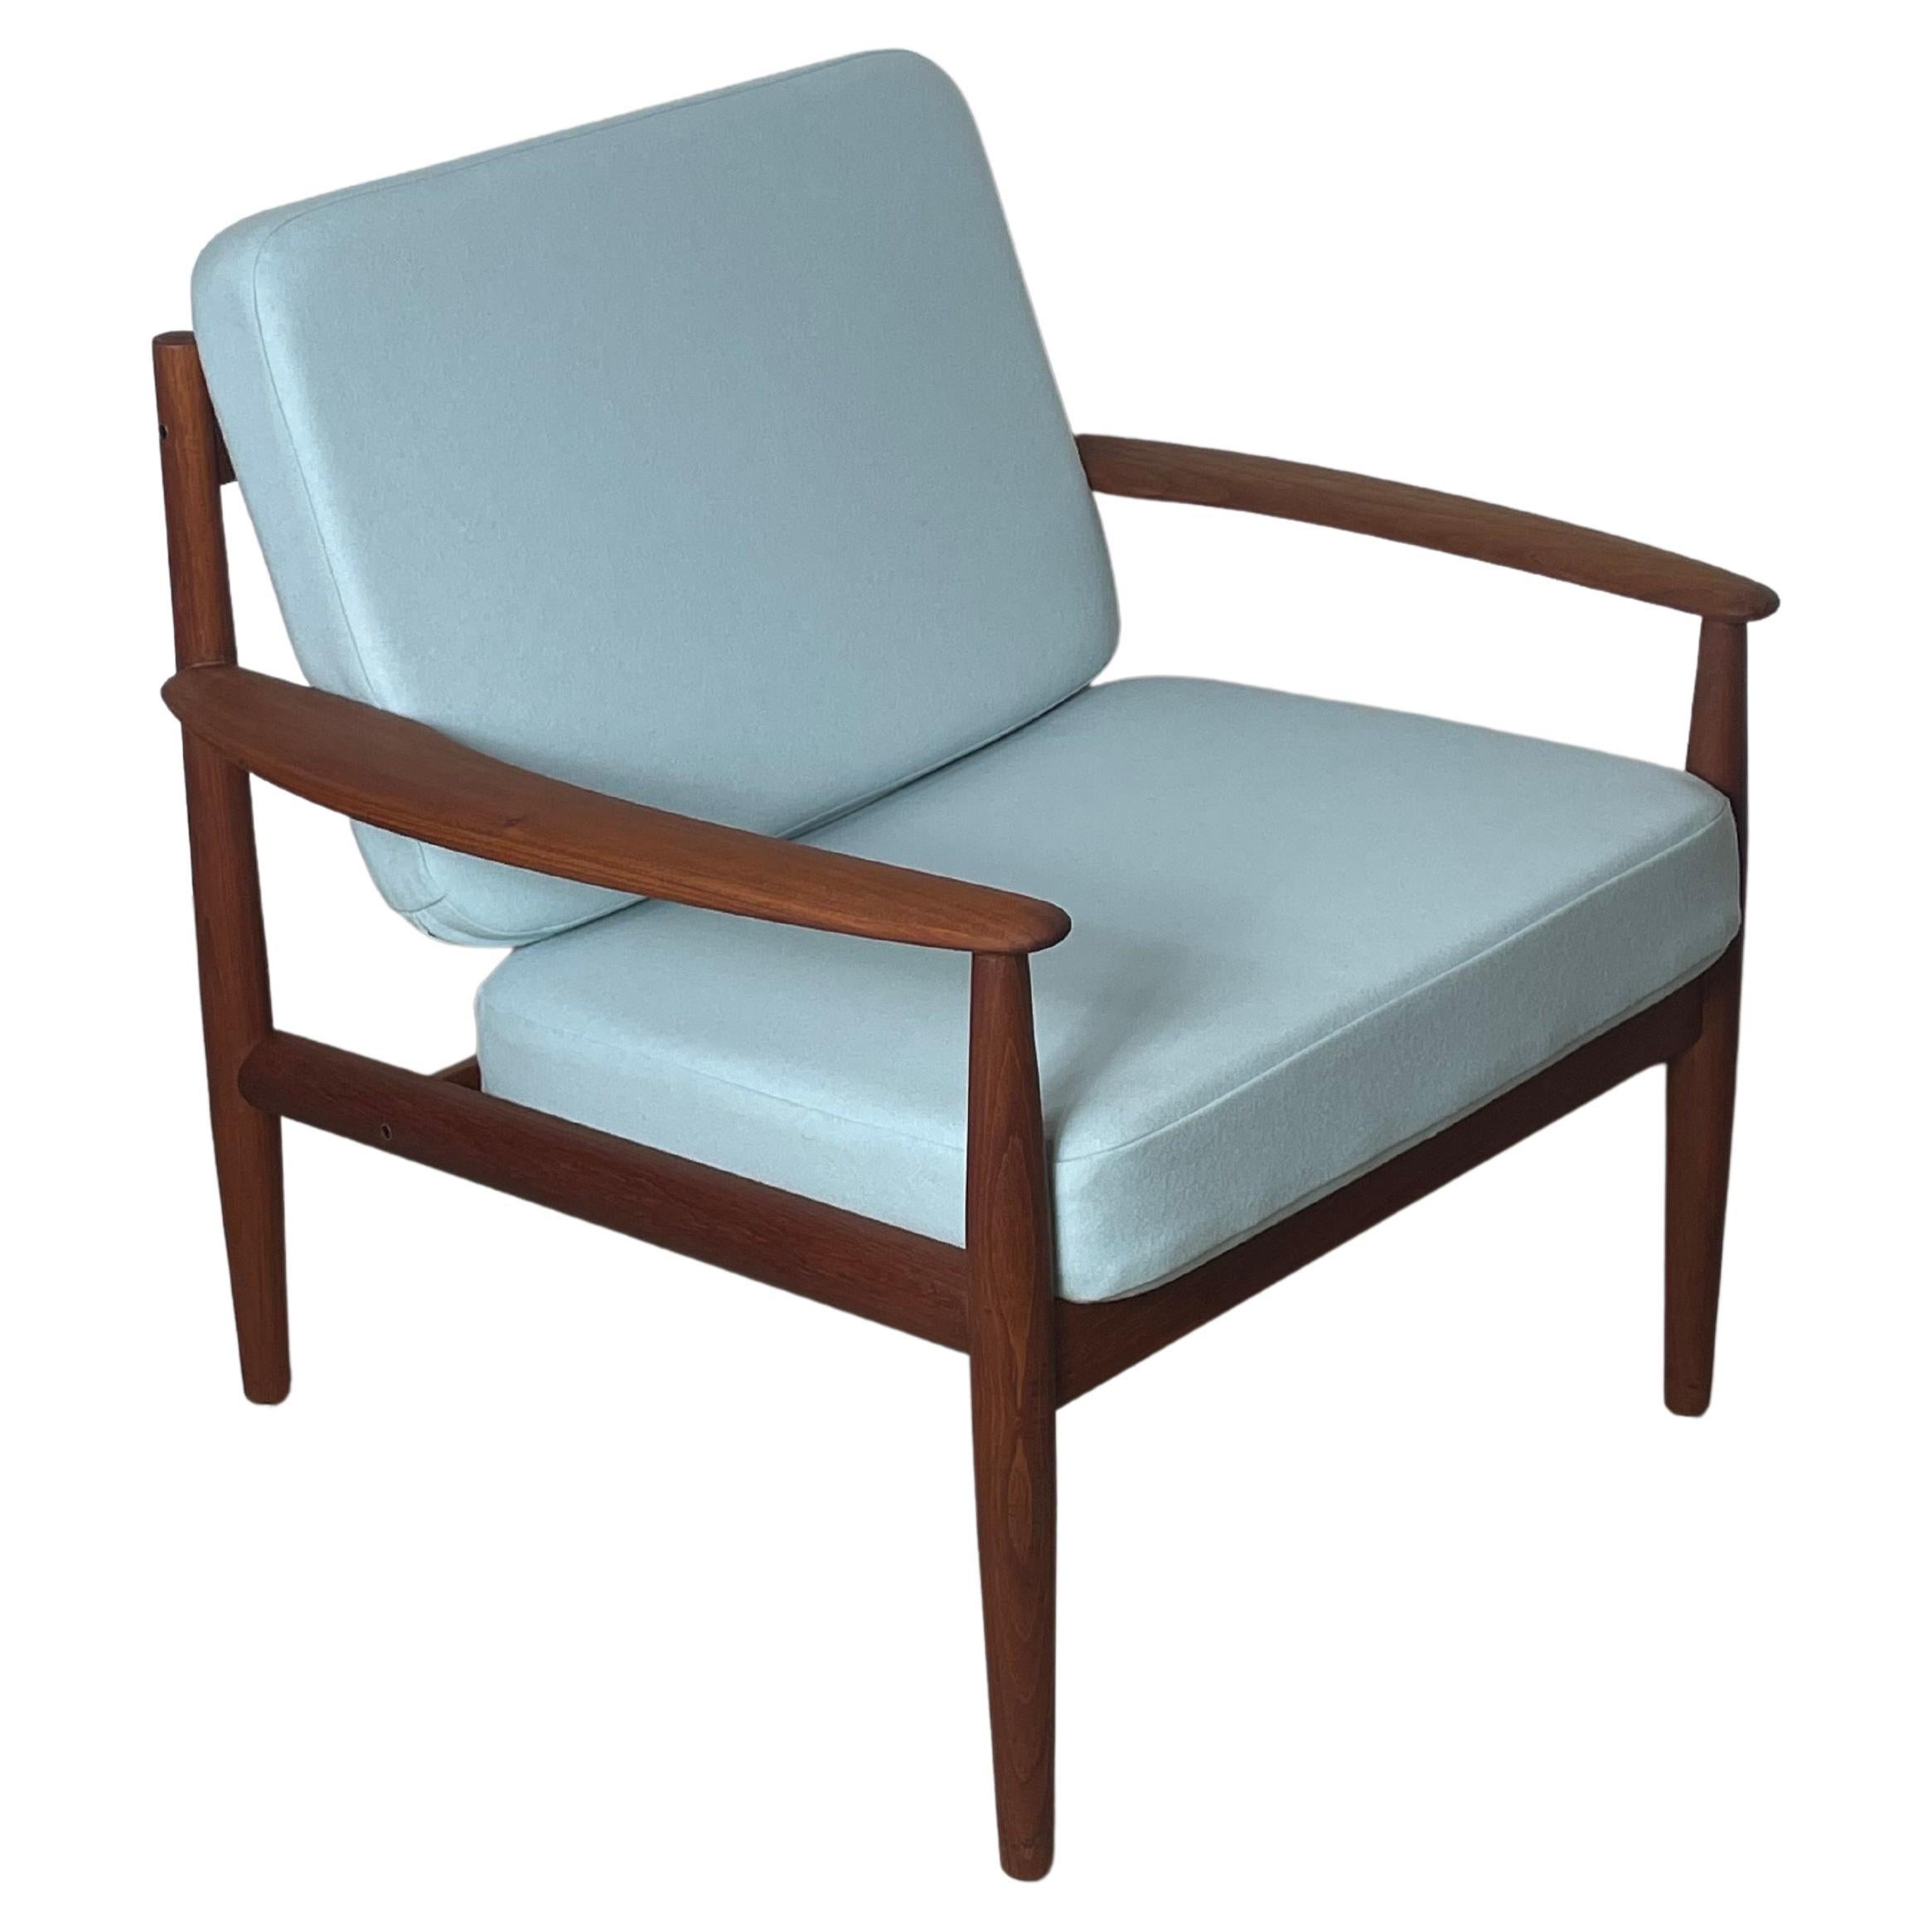 Danish Teak Easy Chair by Grete Jalk with New Upholstery